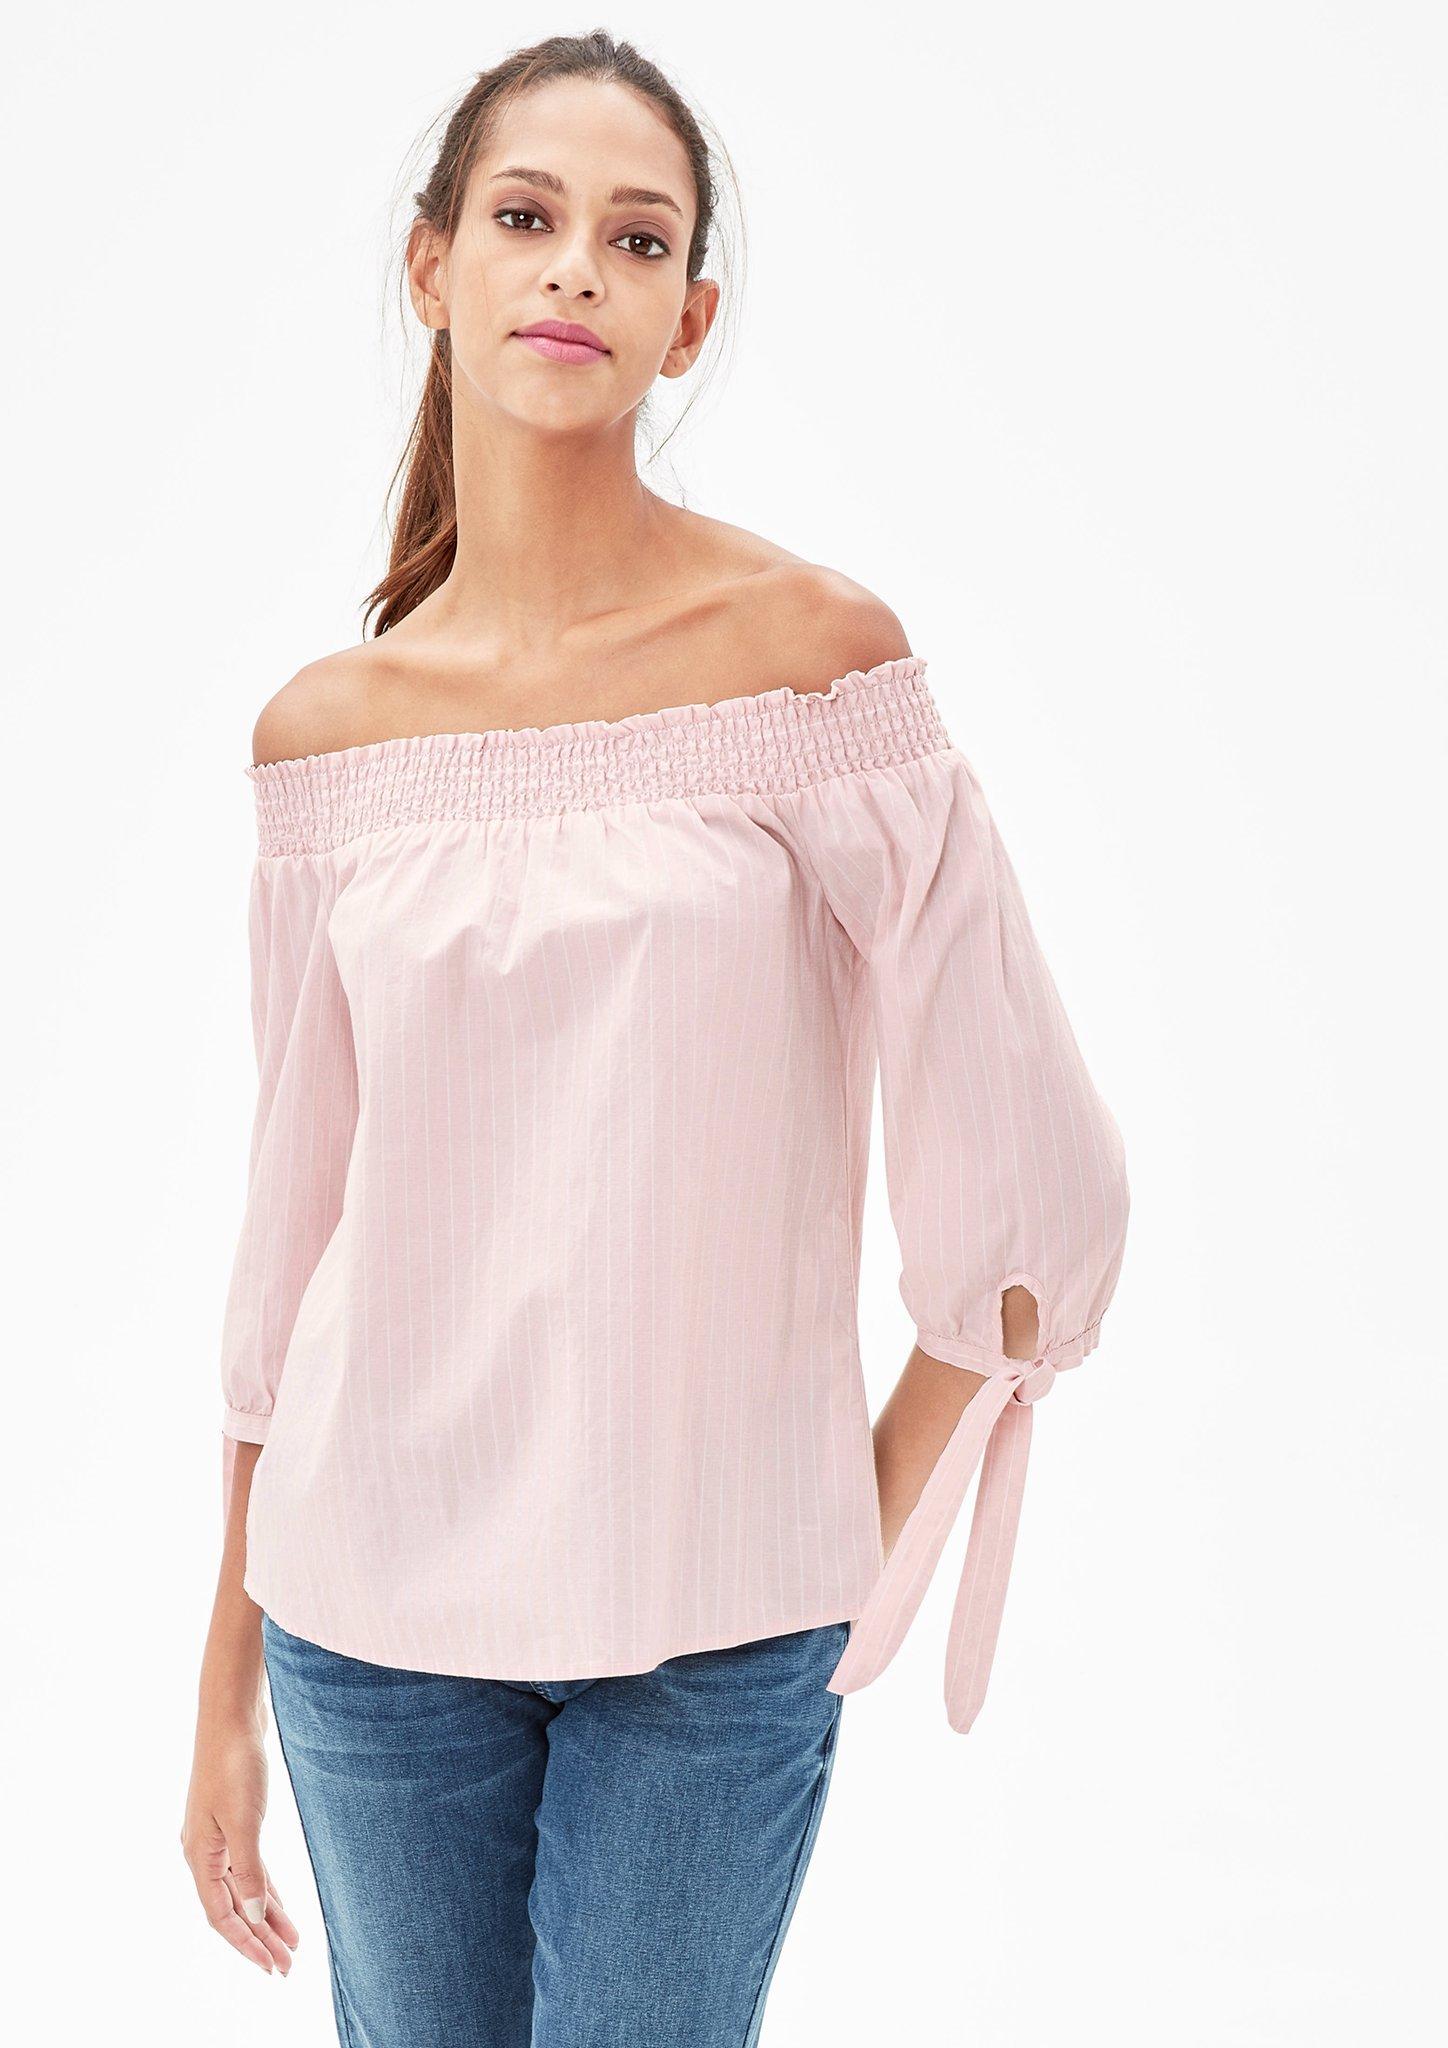 Patterned Long Sleeve Tops for Women | s.Oliver